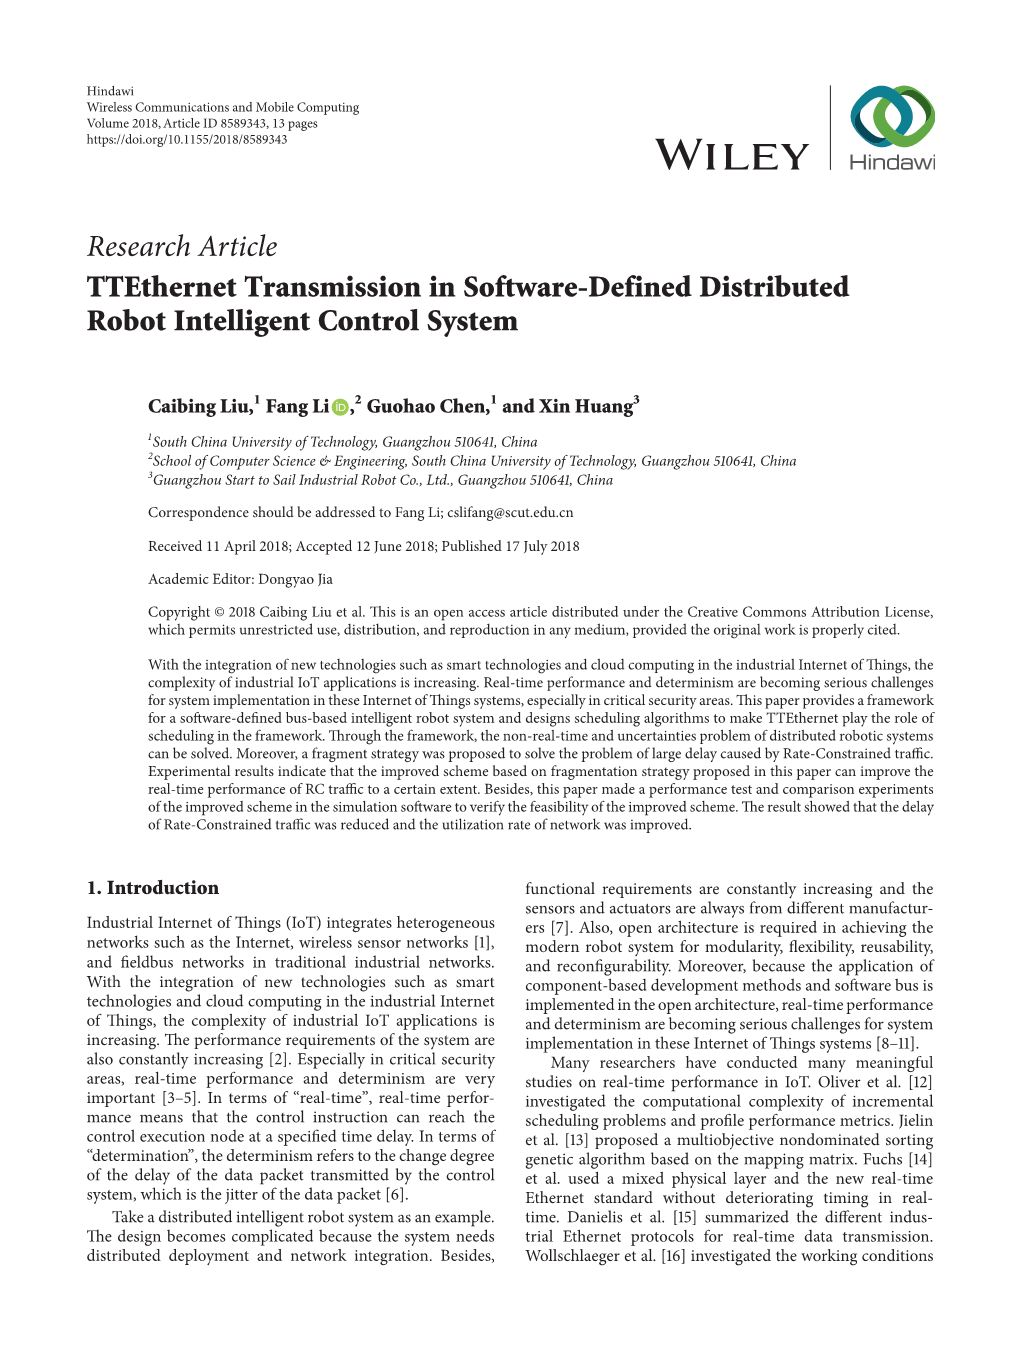 Research Article Ttethernet Transmission in Software-Defined Distributed Robot Intelligent Control System